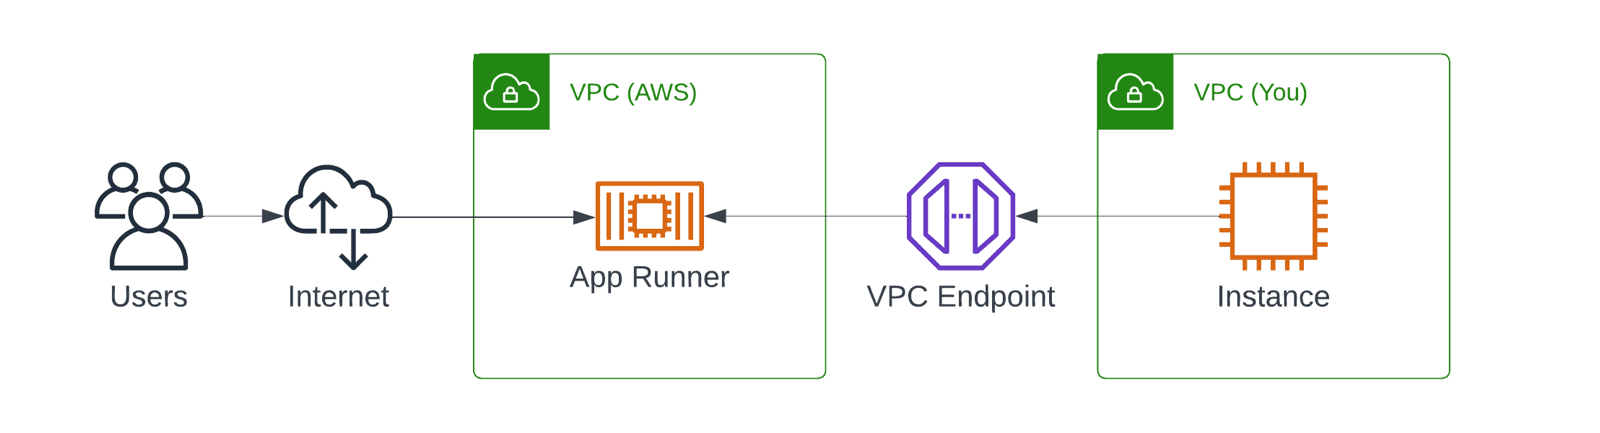 VPC Endpoints make sure traffic to App Runner does not flow through the Internet